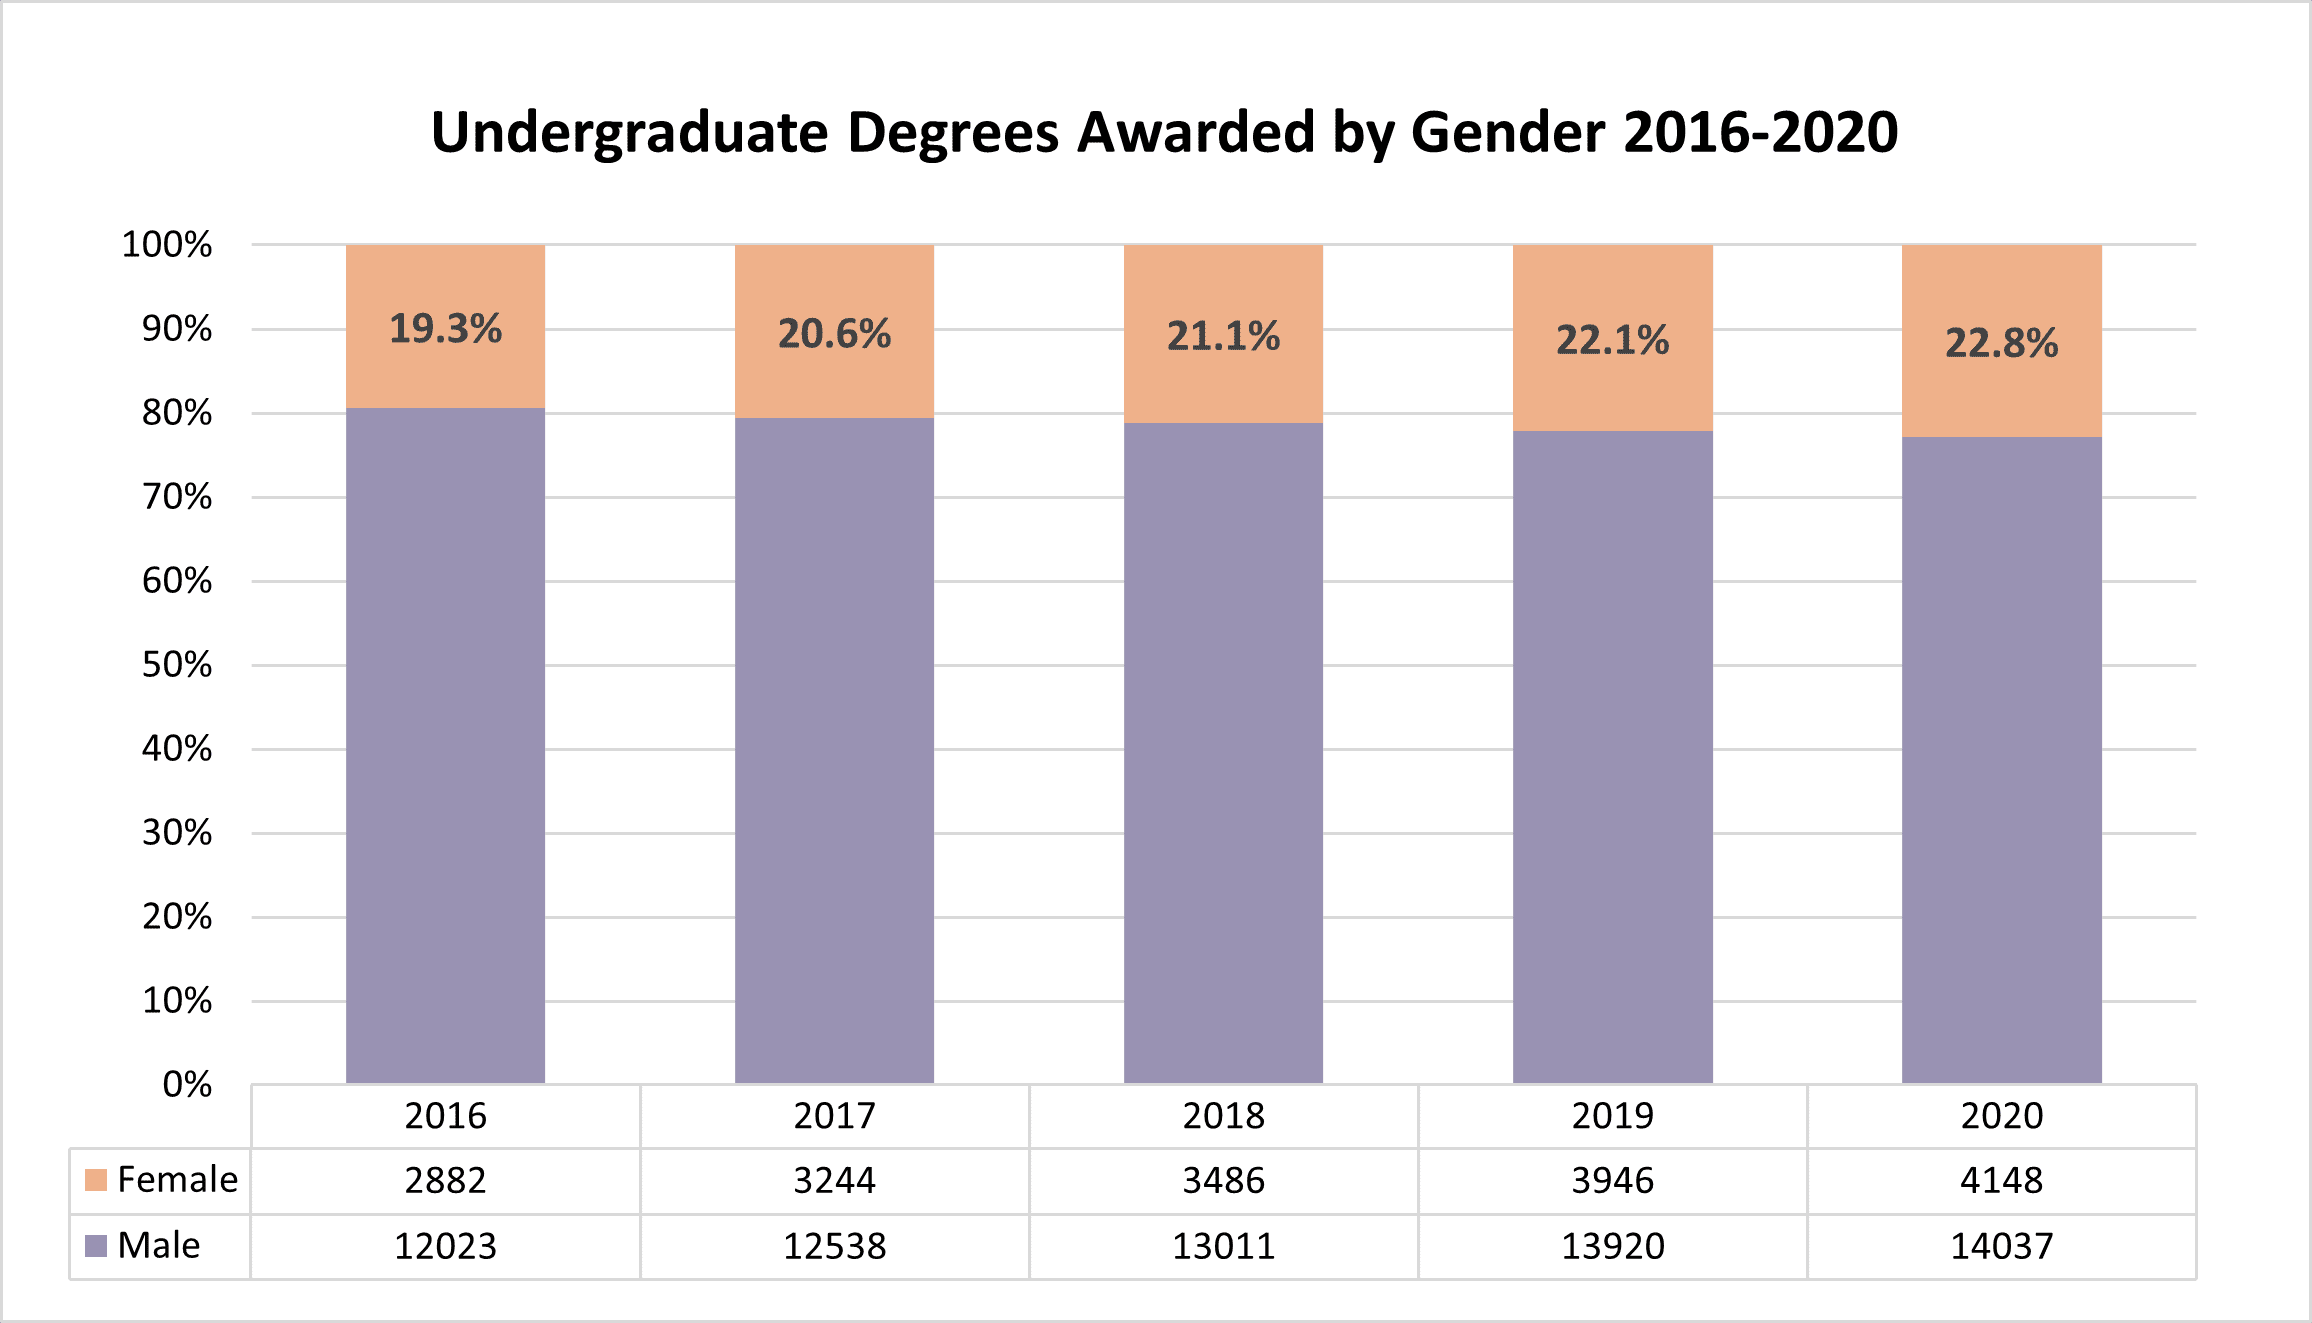 Undergraduate degrees awarded by gender 2016-2020